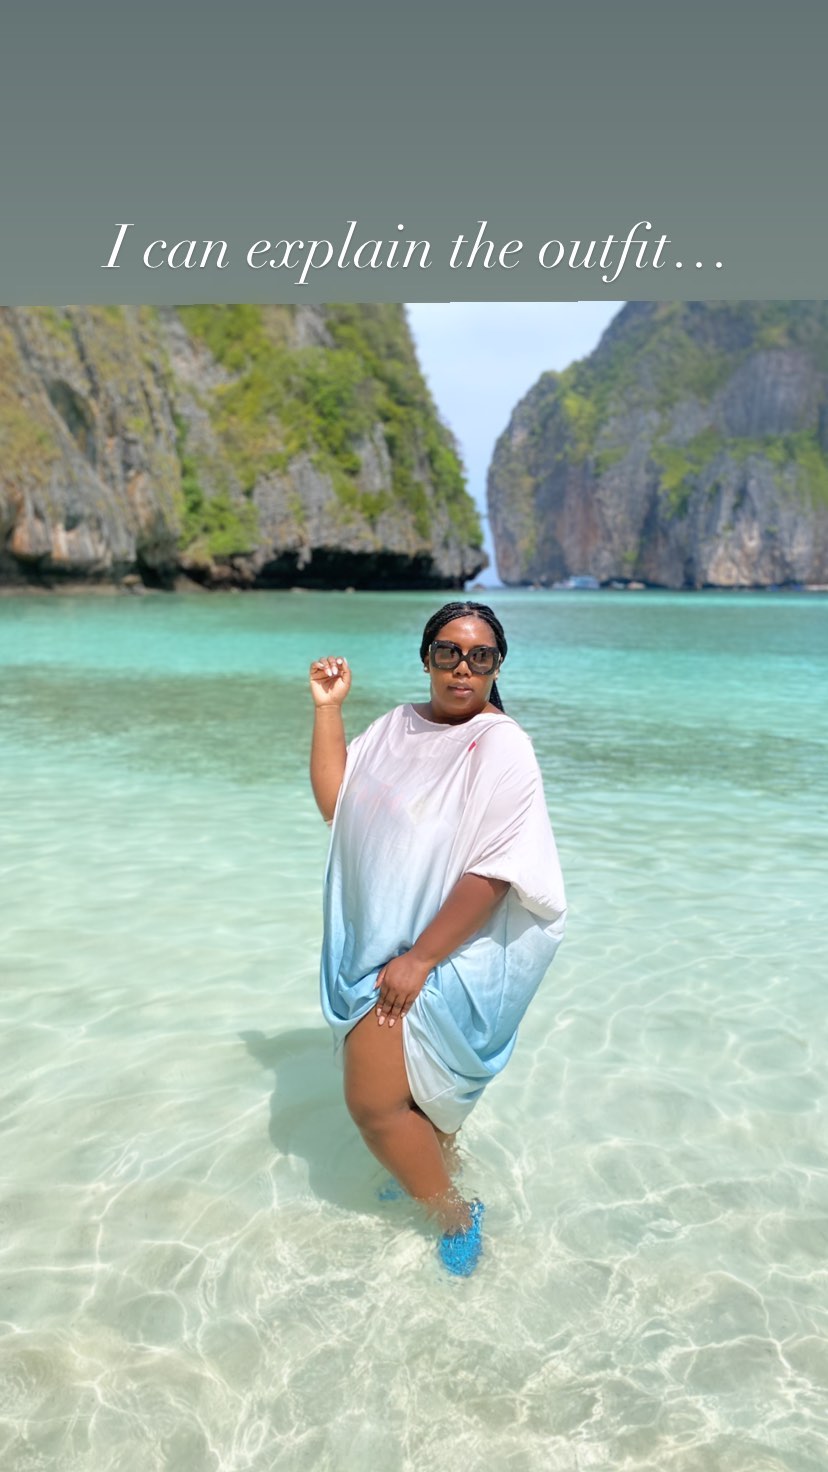 Pictures: Inside LaConco's Thailand Vacation 